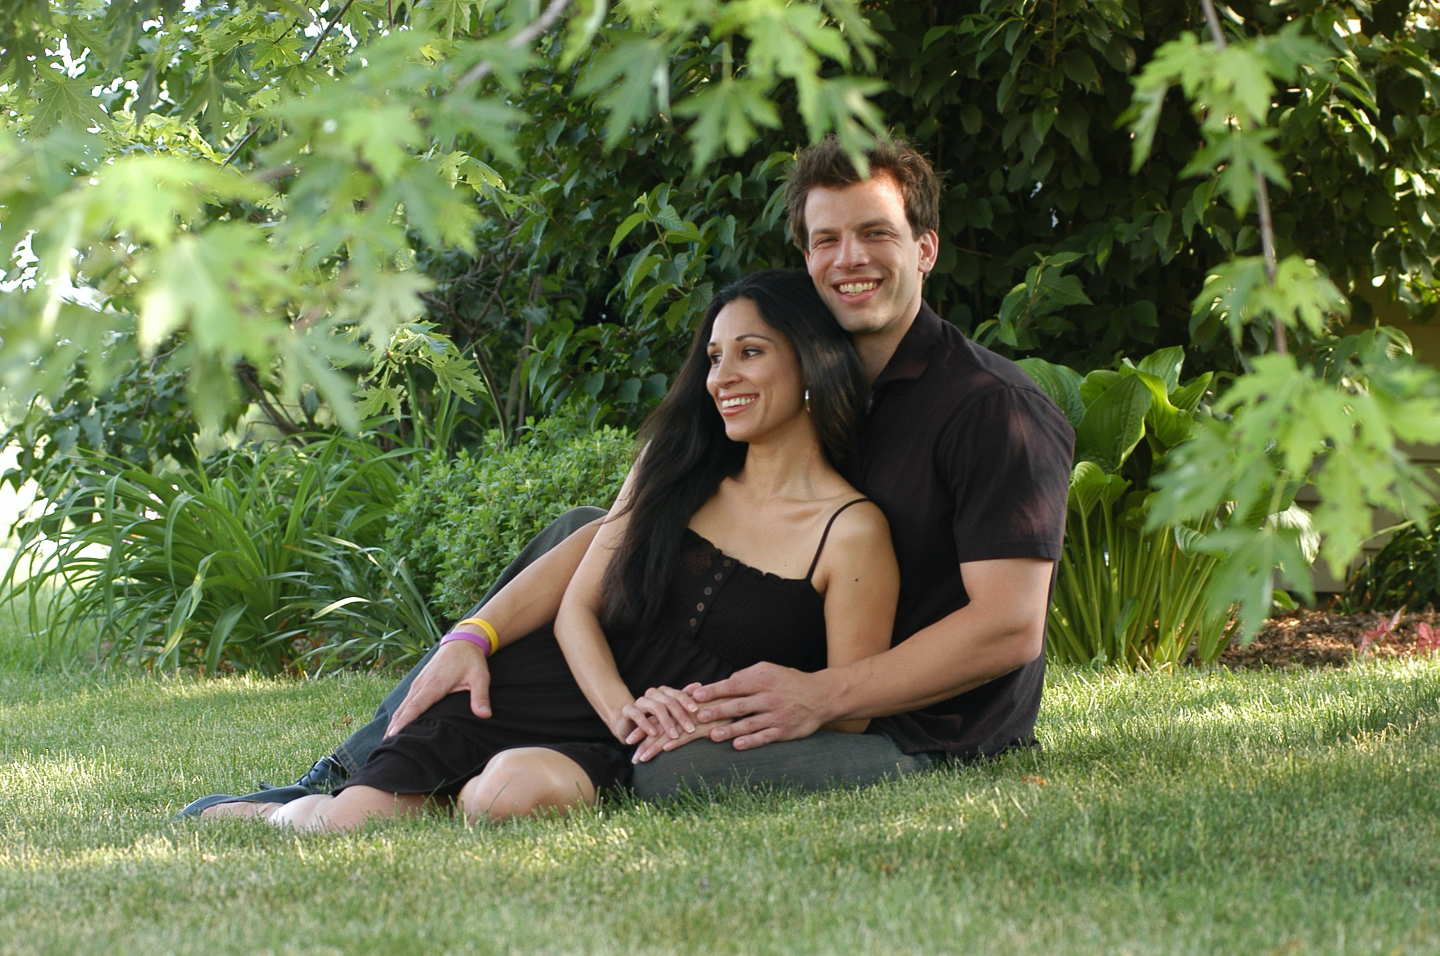 Portrait of couple outdoors: Handsome young man seated on ground with long haired young lady. Both smiling brightly.